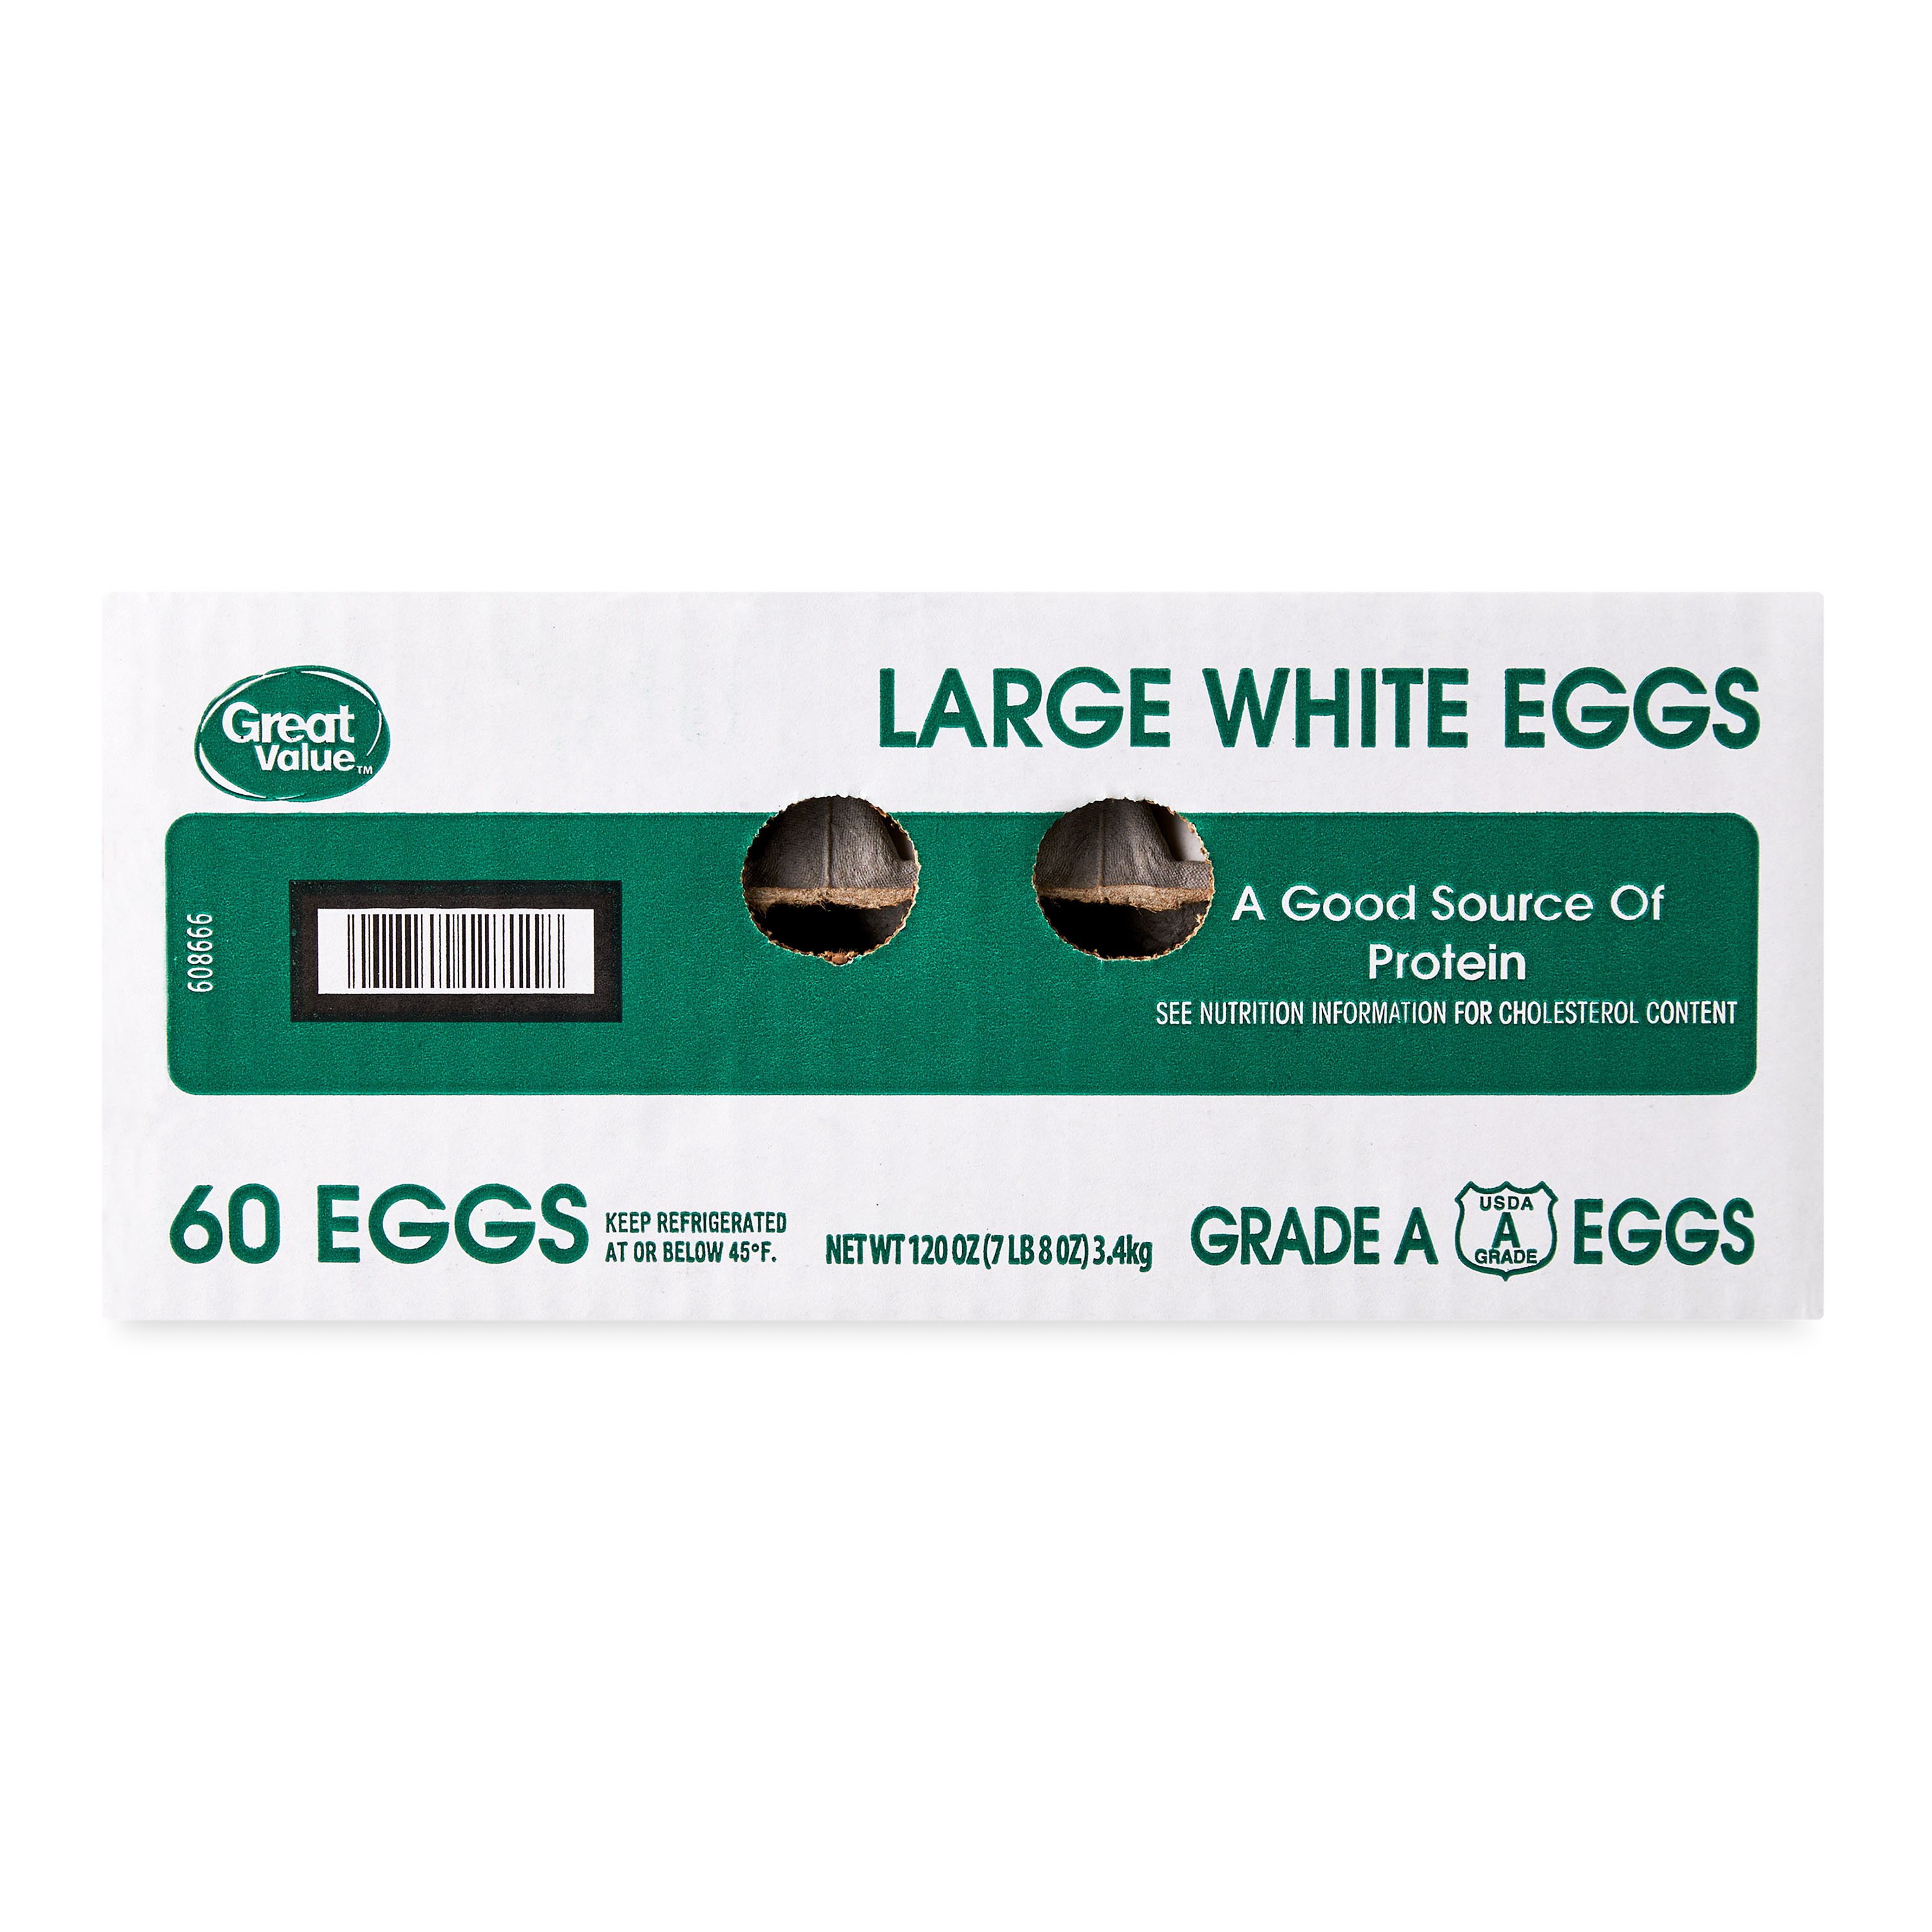 Great Value Large White Eggs, 60 Count - image 5 of 6